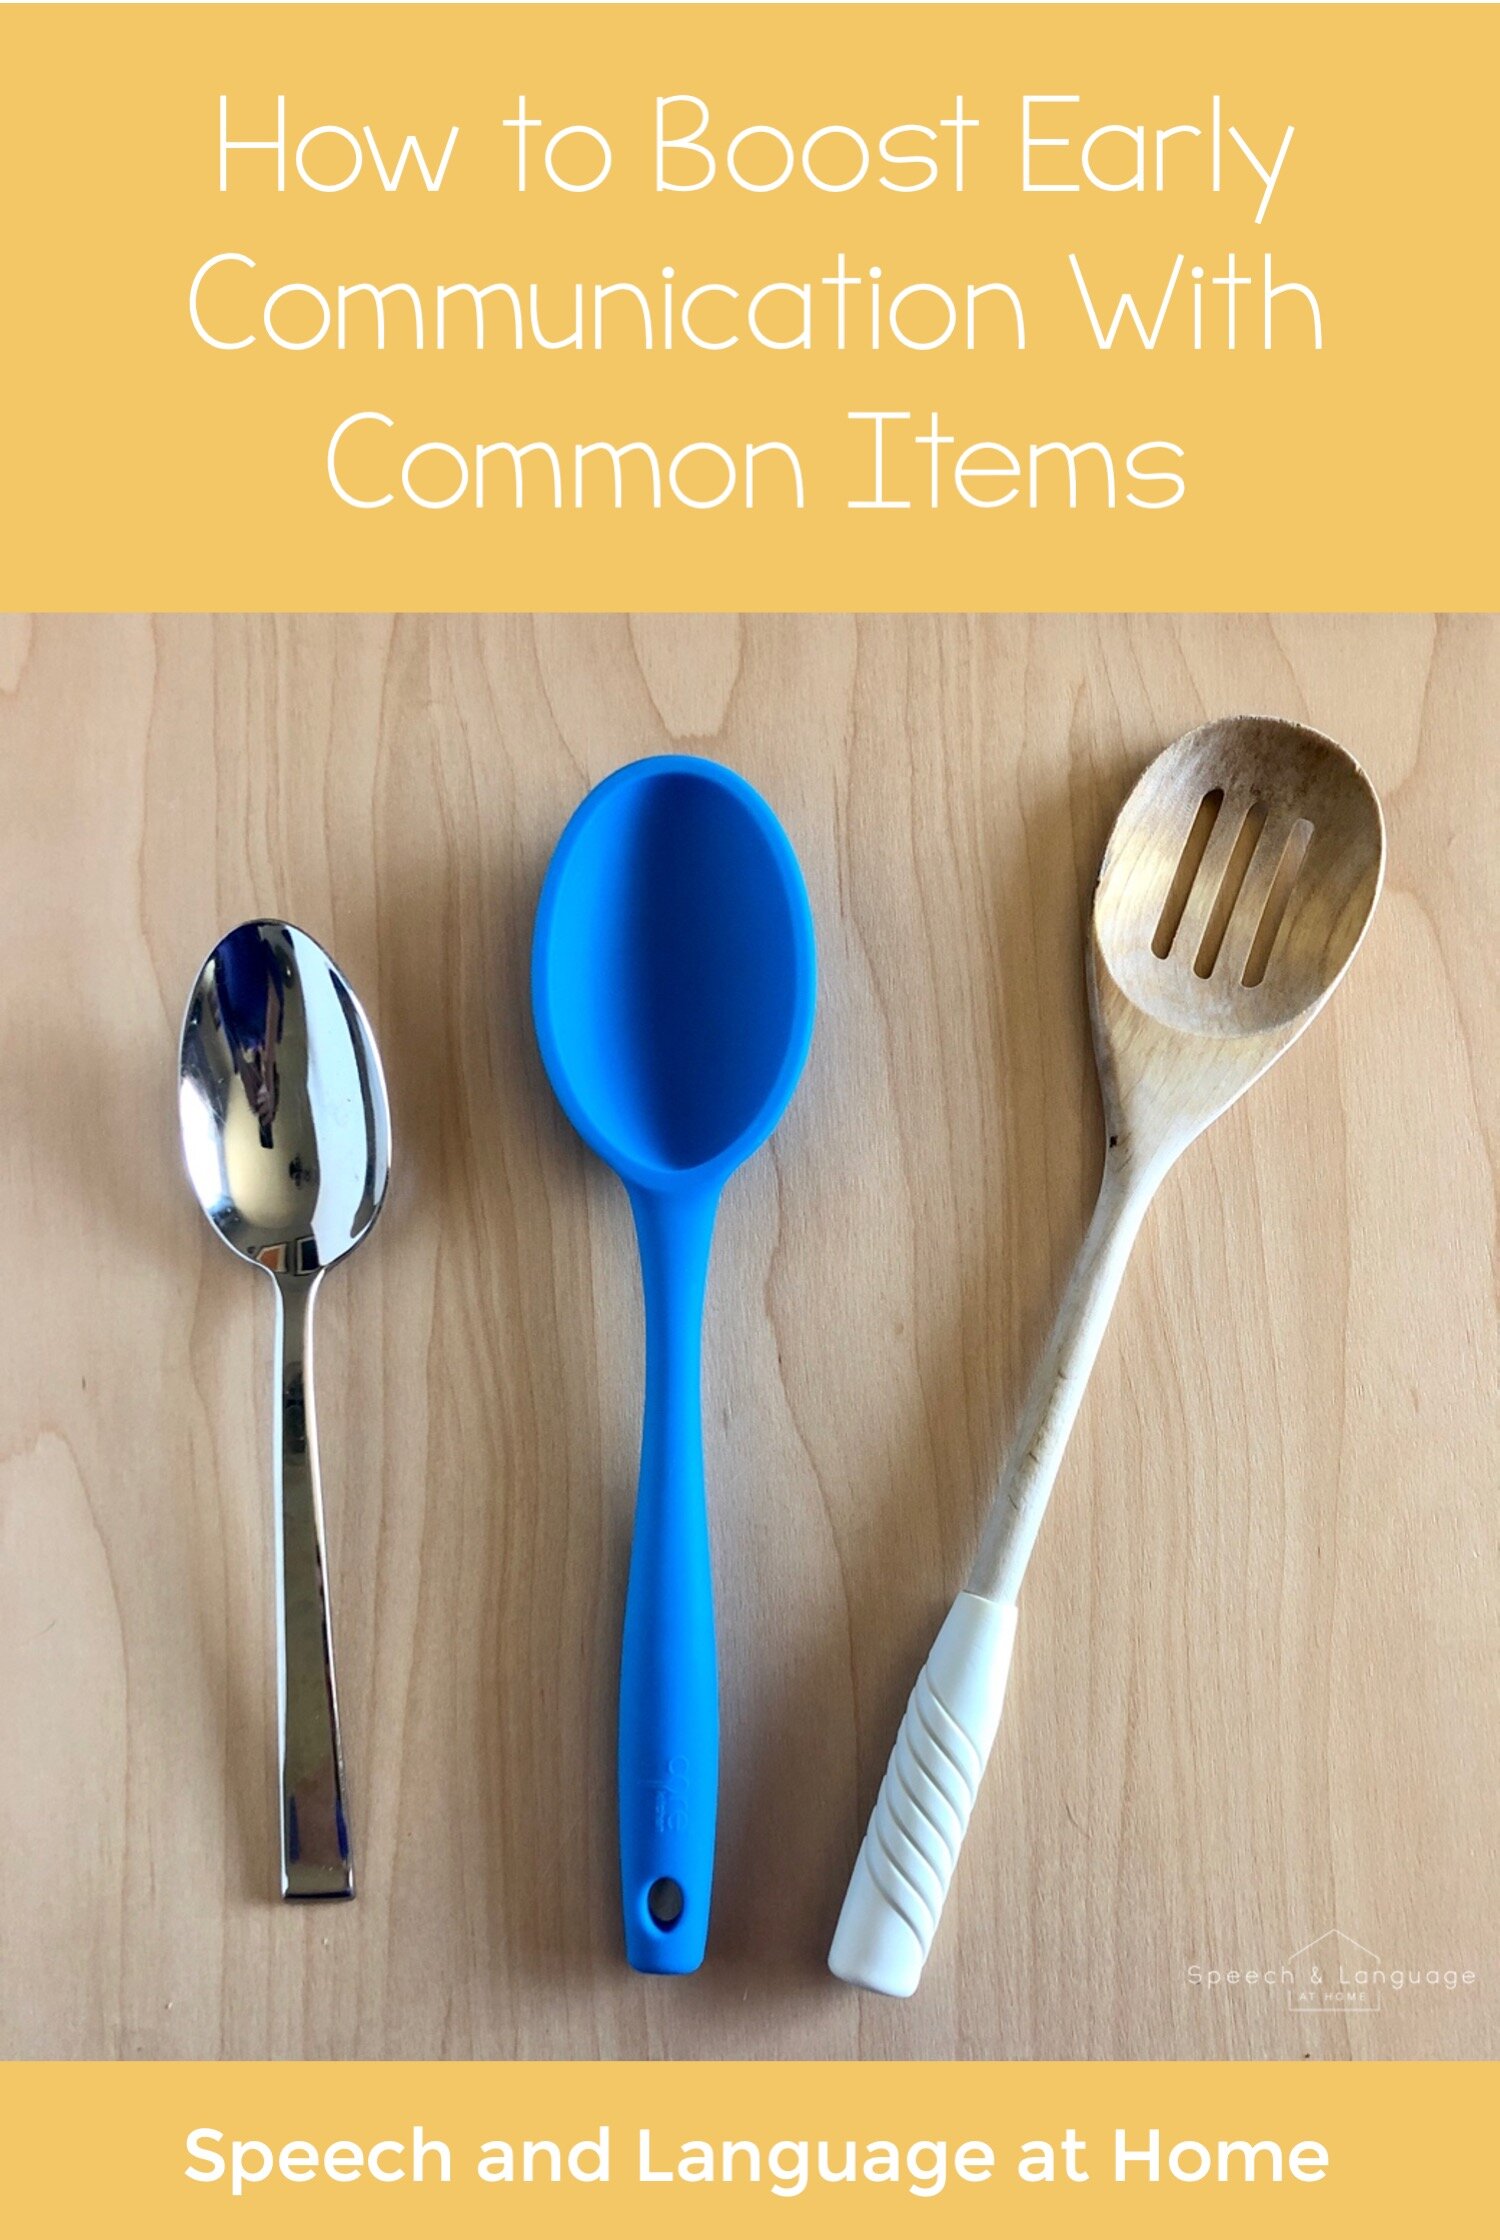 How to Boost Early Communication With Common Items like spoons. For a guide complete with everyday items and their therapeutic uses through fall (and other seasons!), check out this parent handout from Speech and Language at Home. You’ll get 36 ever…